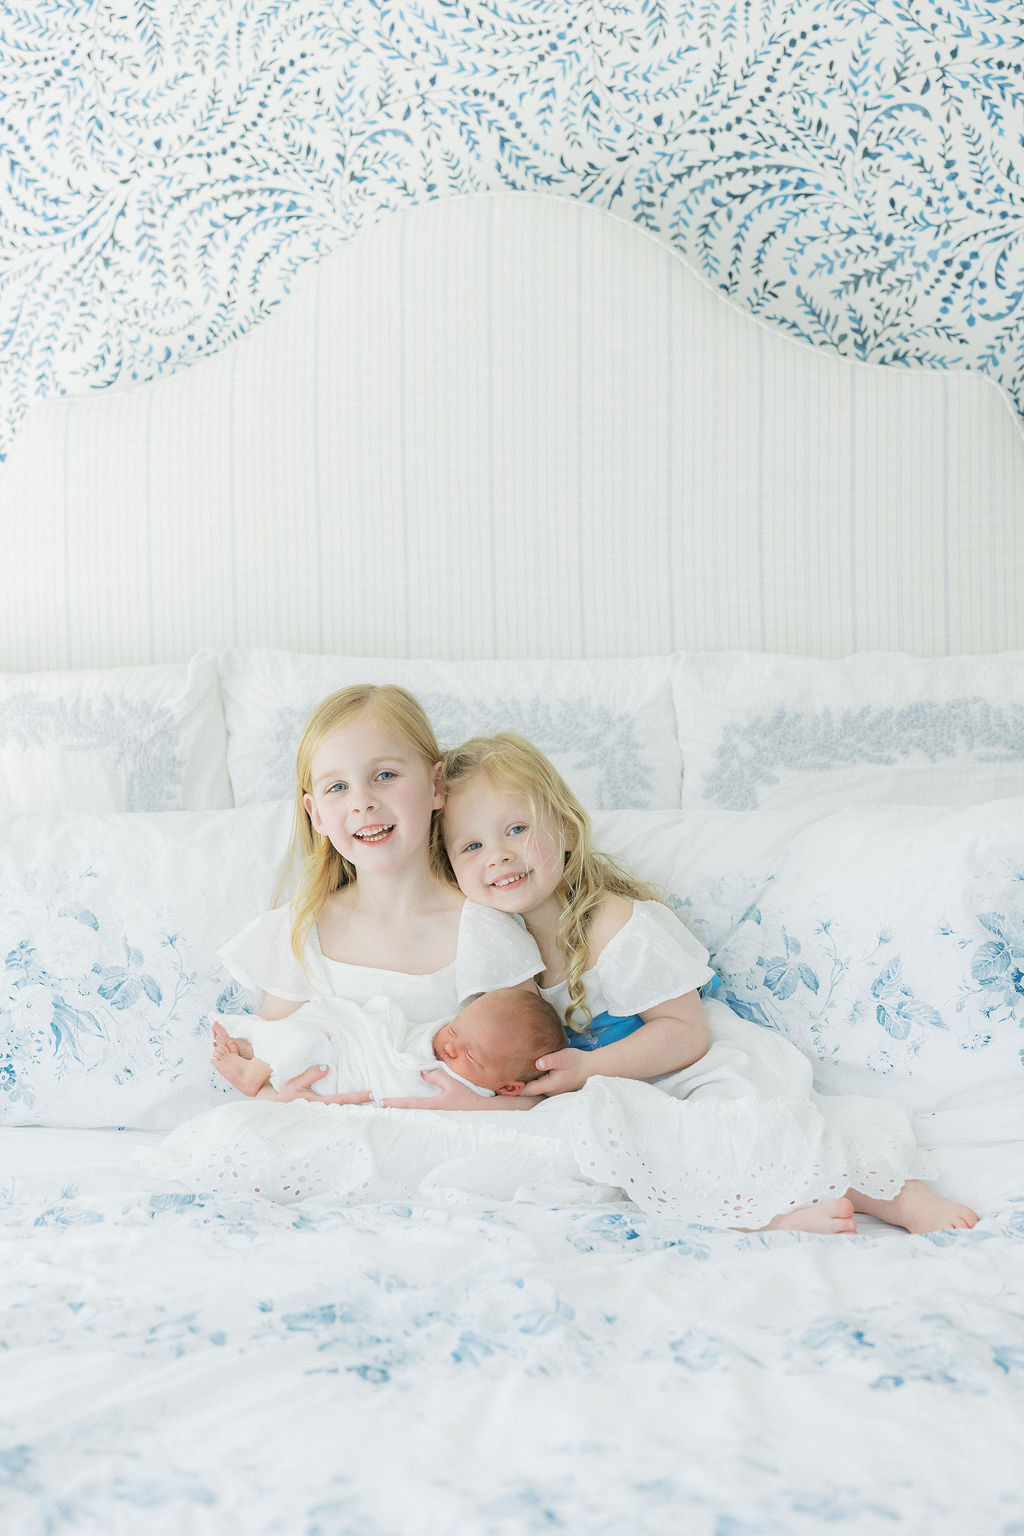 Two young sisters sit on a bed while holding their newborn baby sibling together the red balloon summit nj